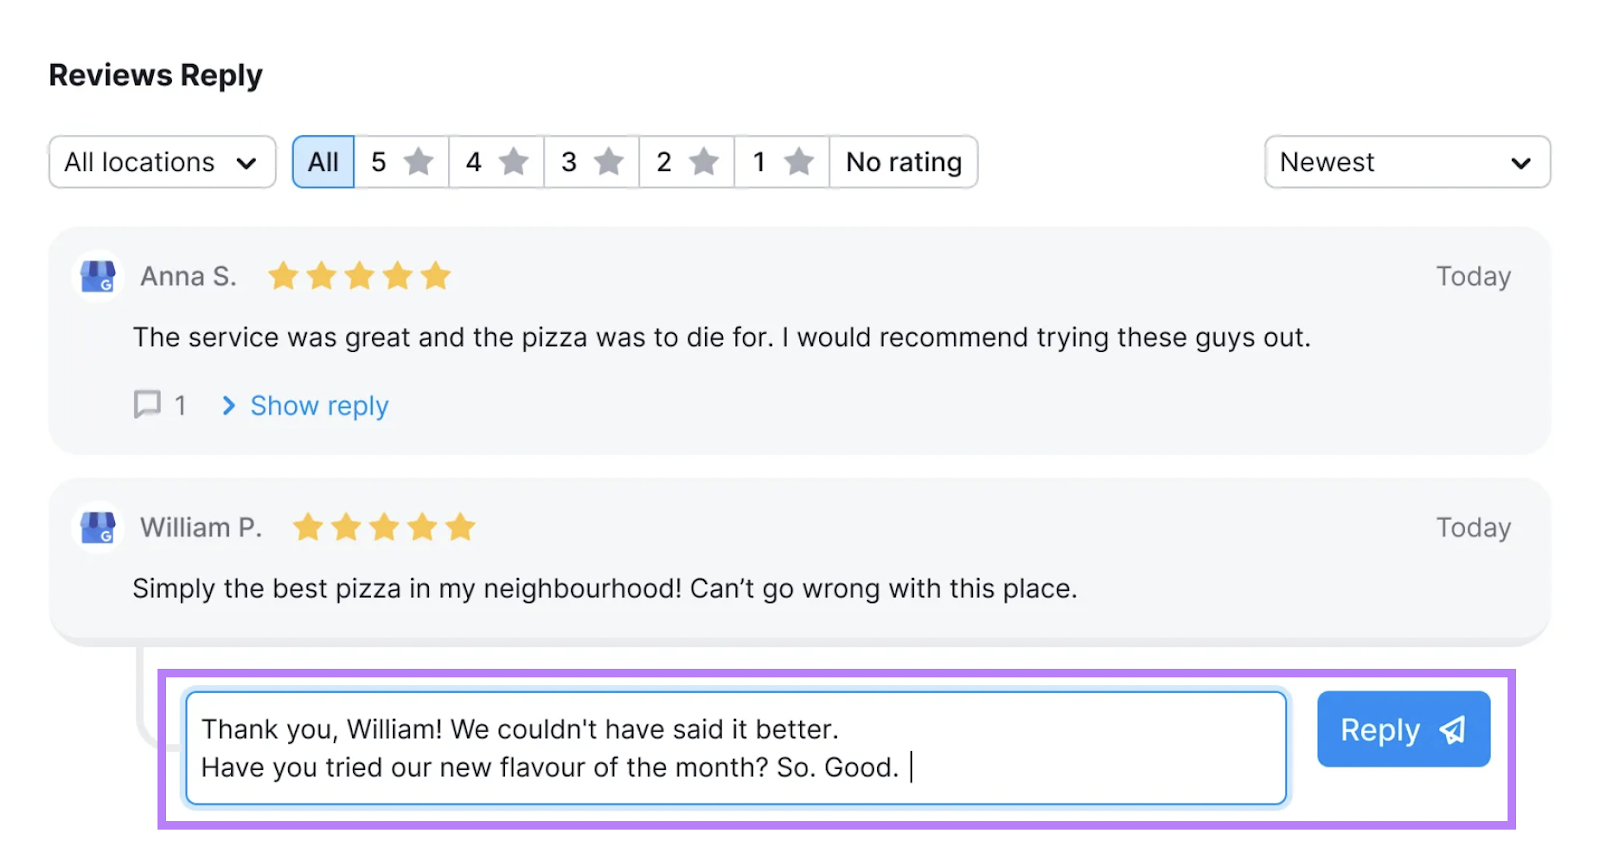 Replying to a Google review from "Reviews Reply" section